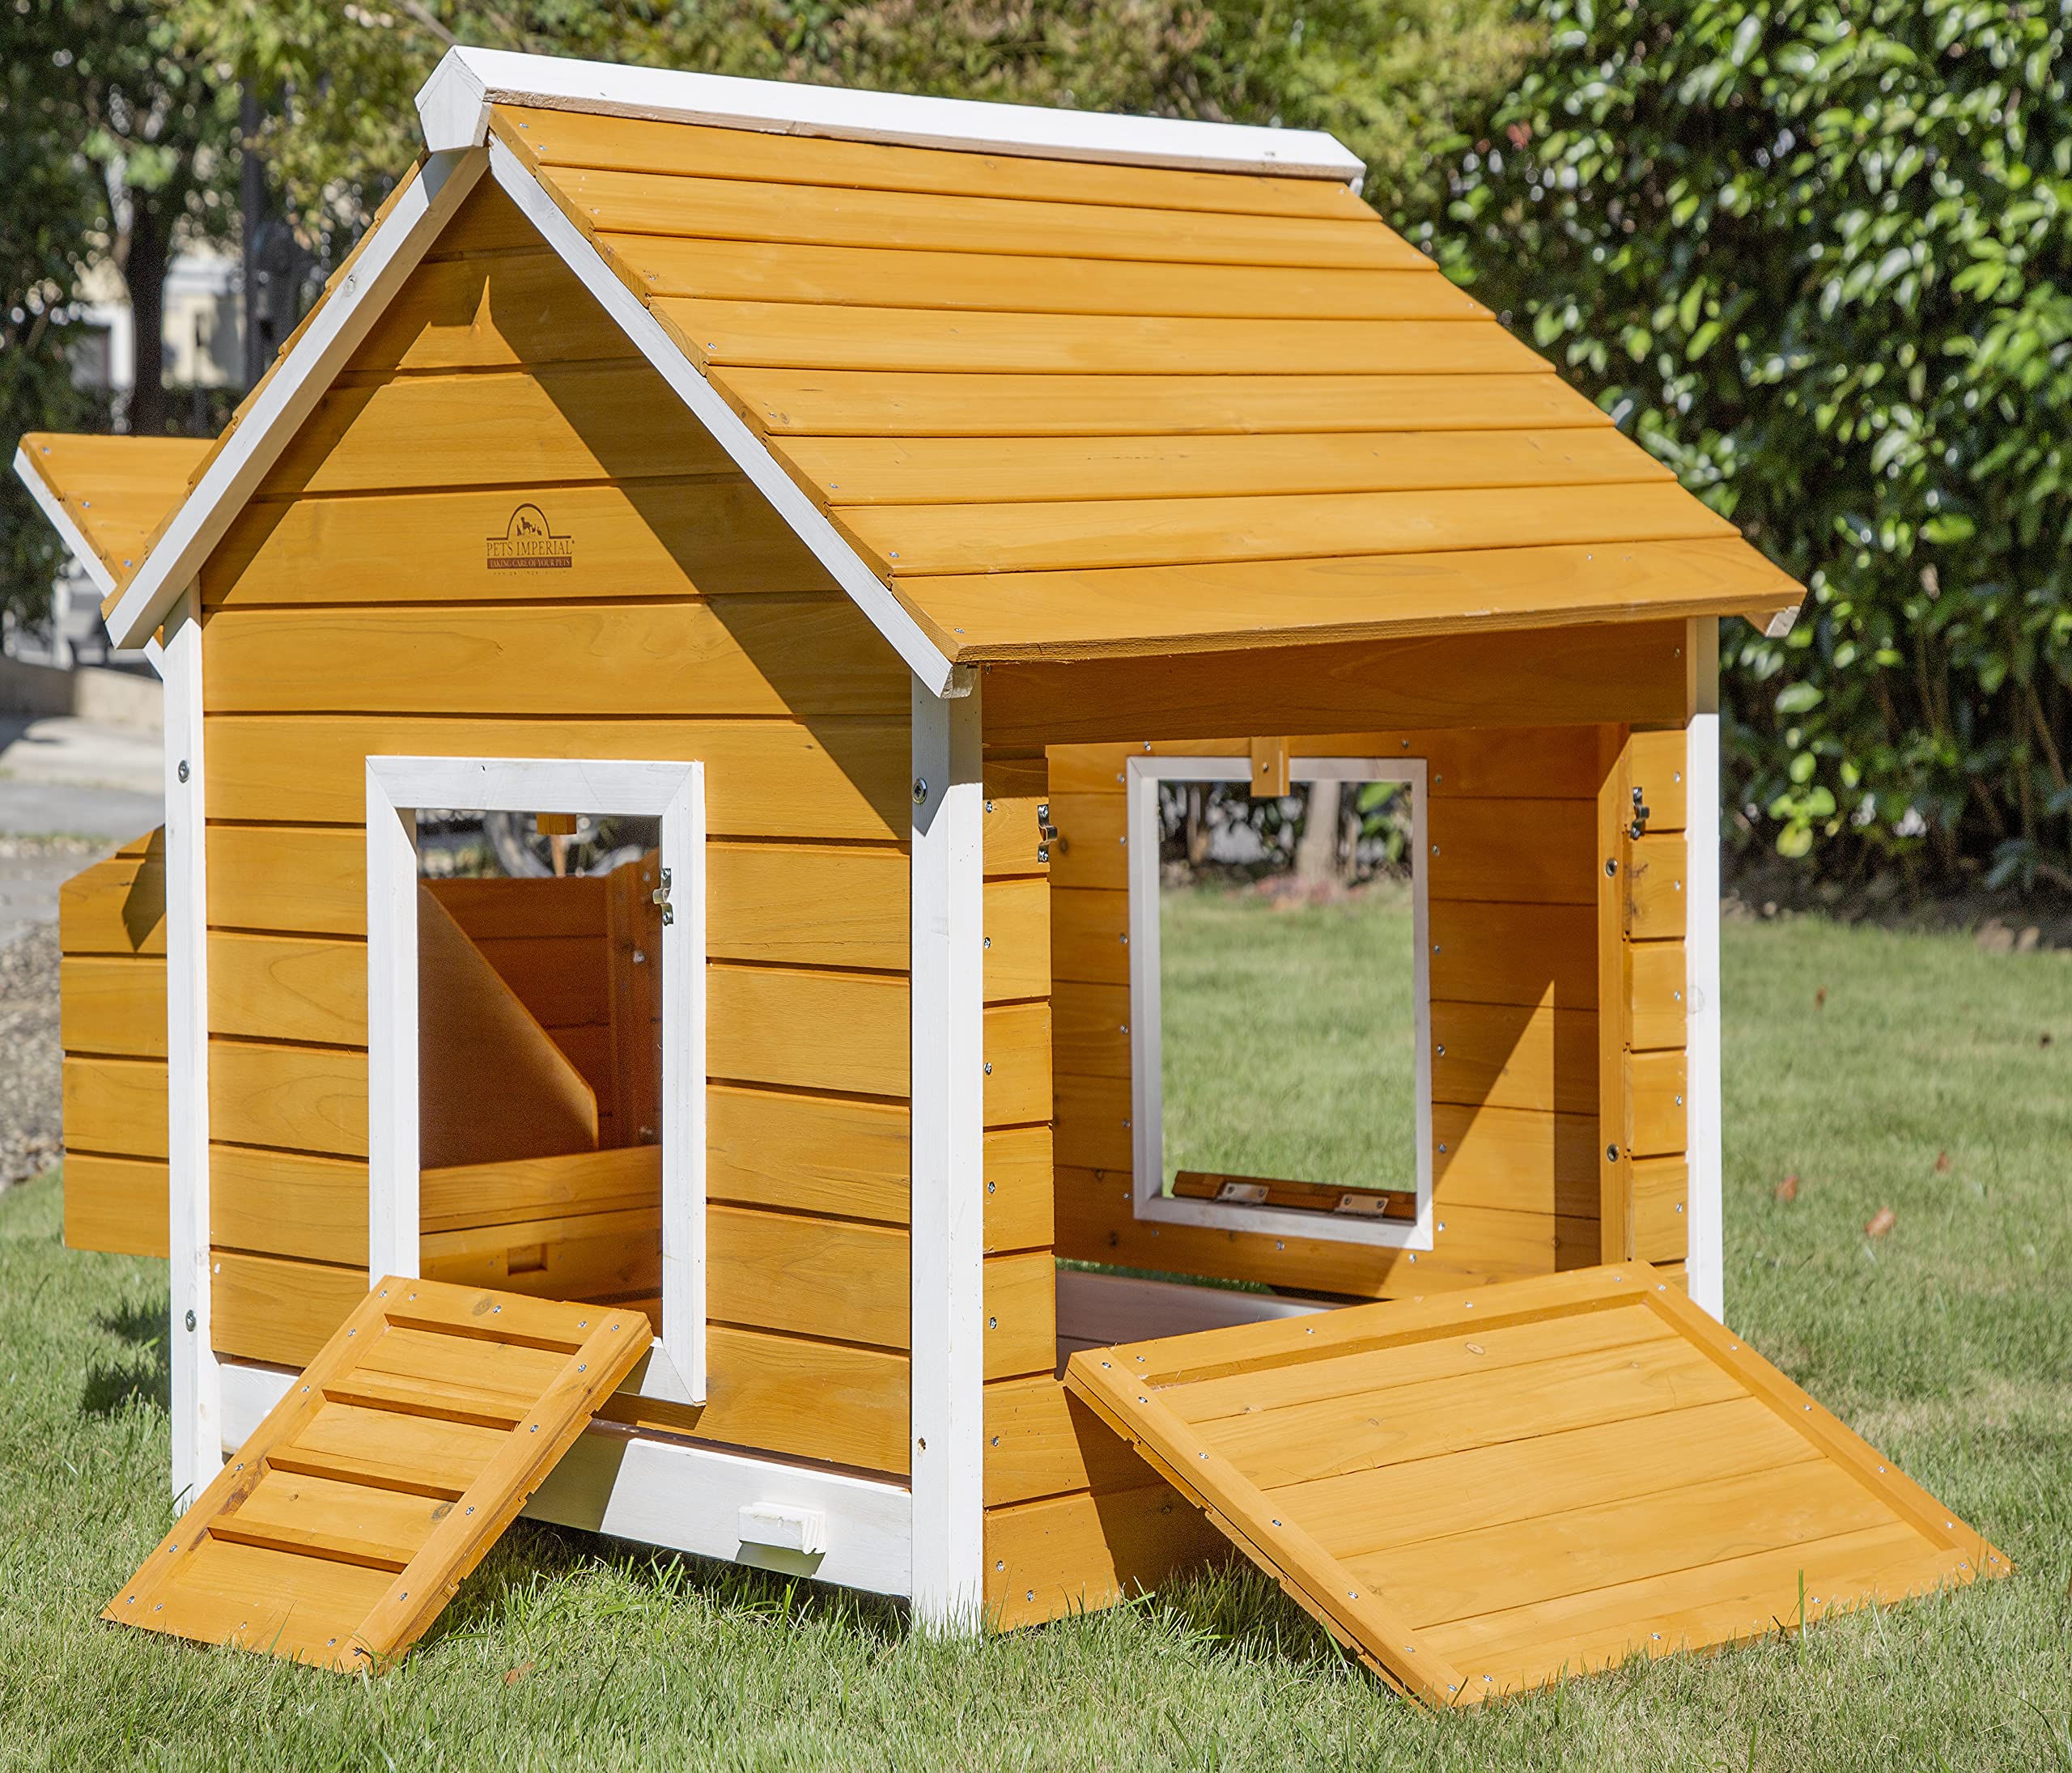 Pets ImperialA Hawksmoor chicken coop - 2 Nesting Spaces - Wooden chicken House - Sliding Tray & Opening Roof